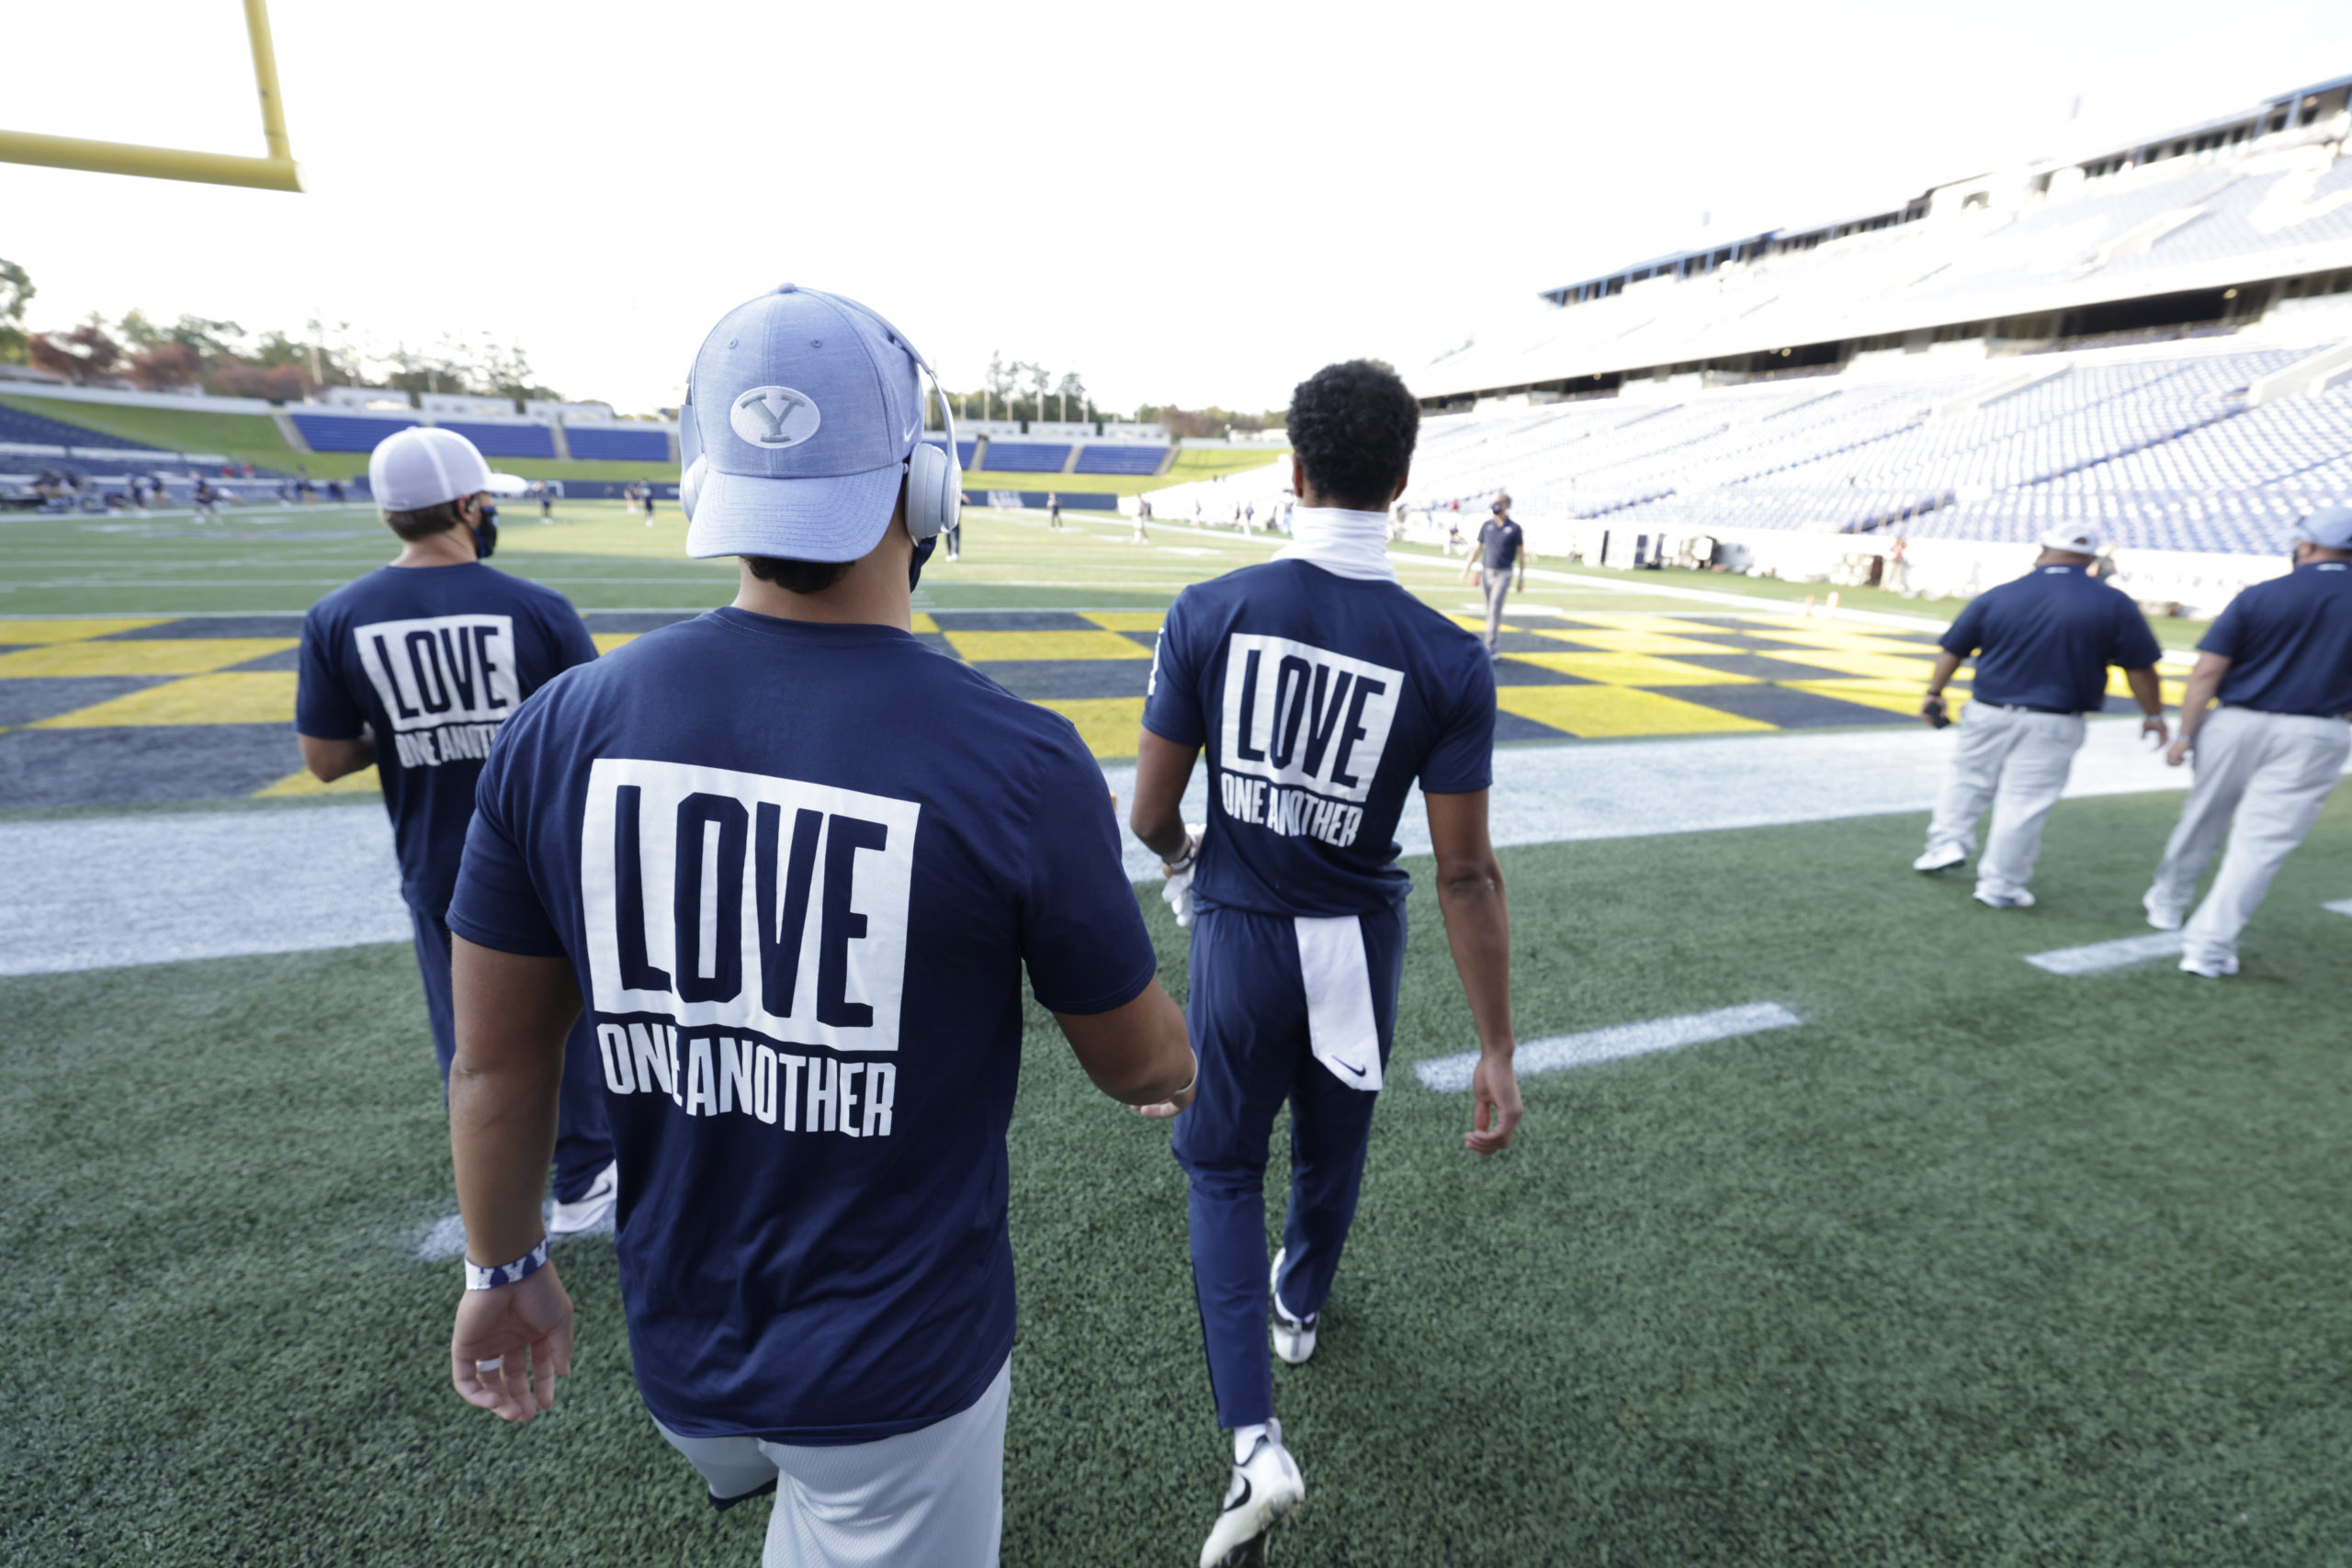 Byu Football Chooses Love One Another As Game Day Shirt Slogan The